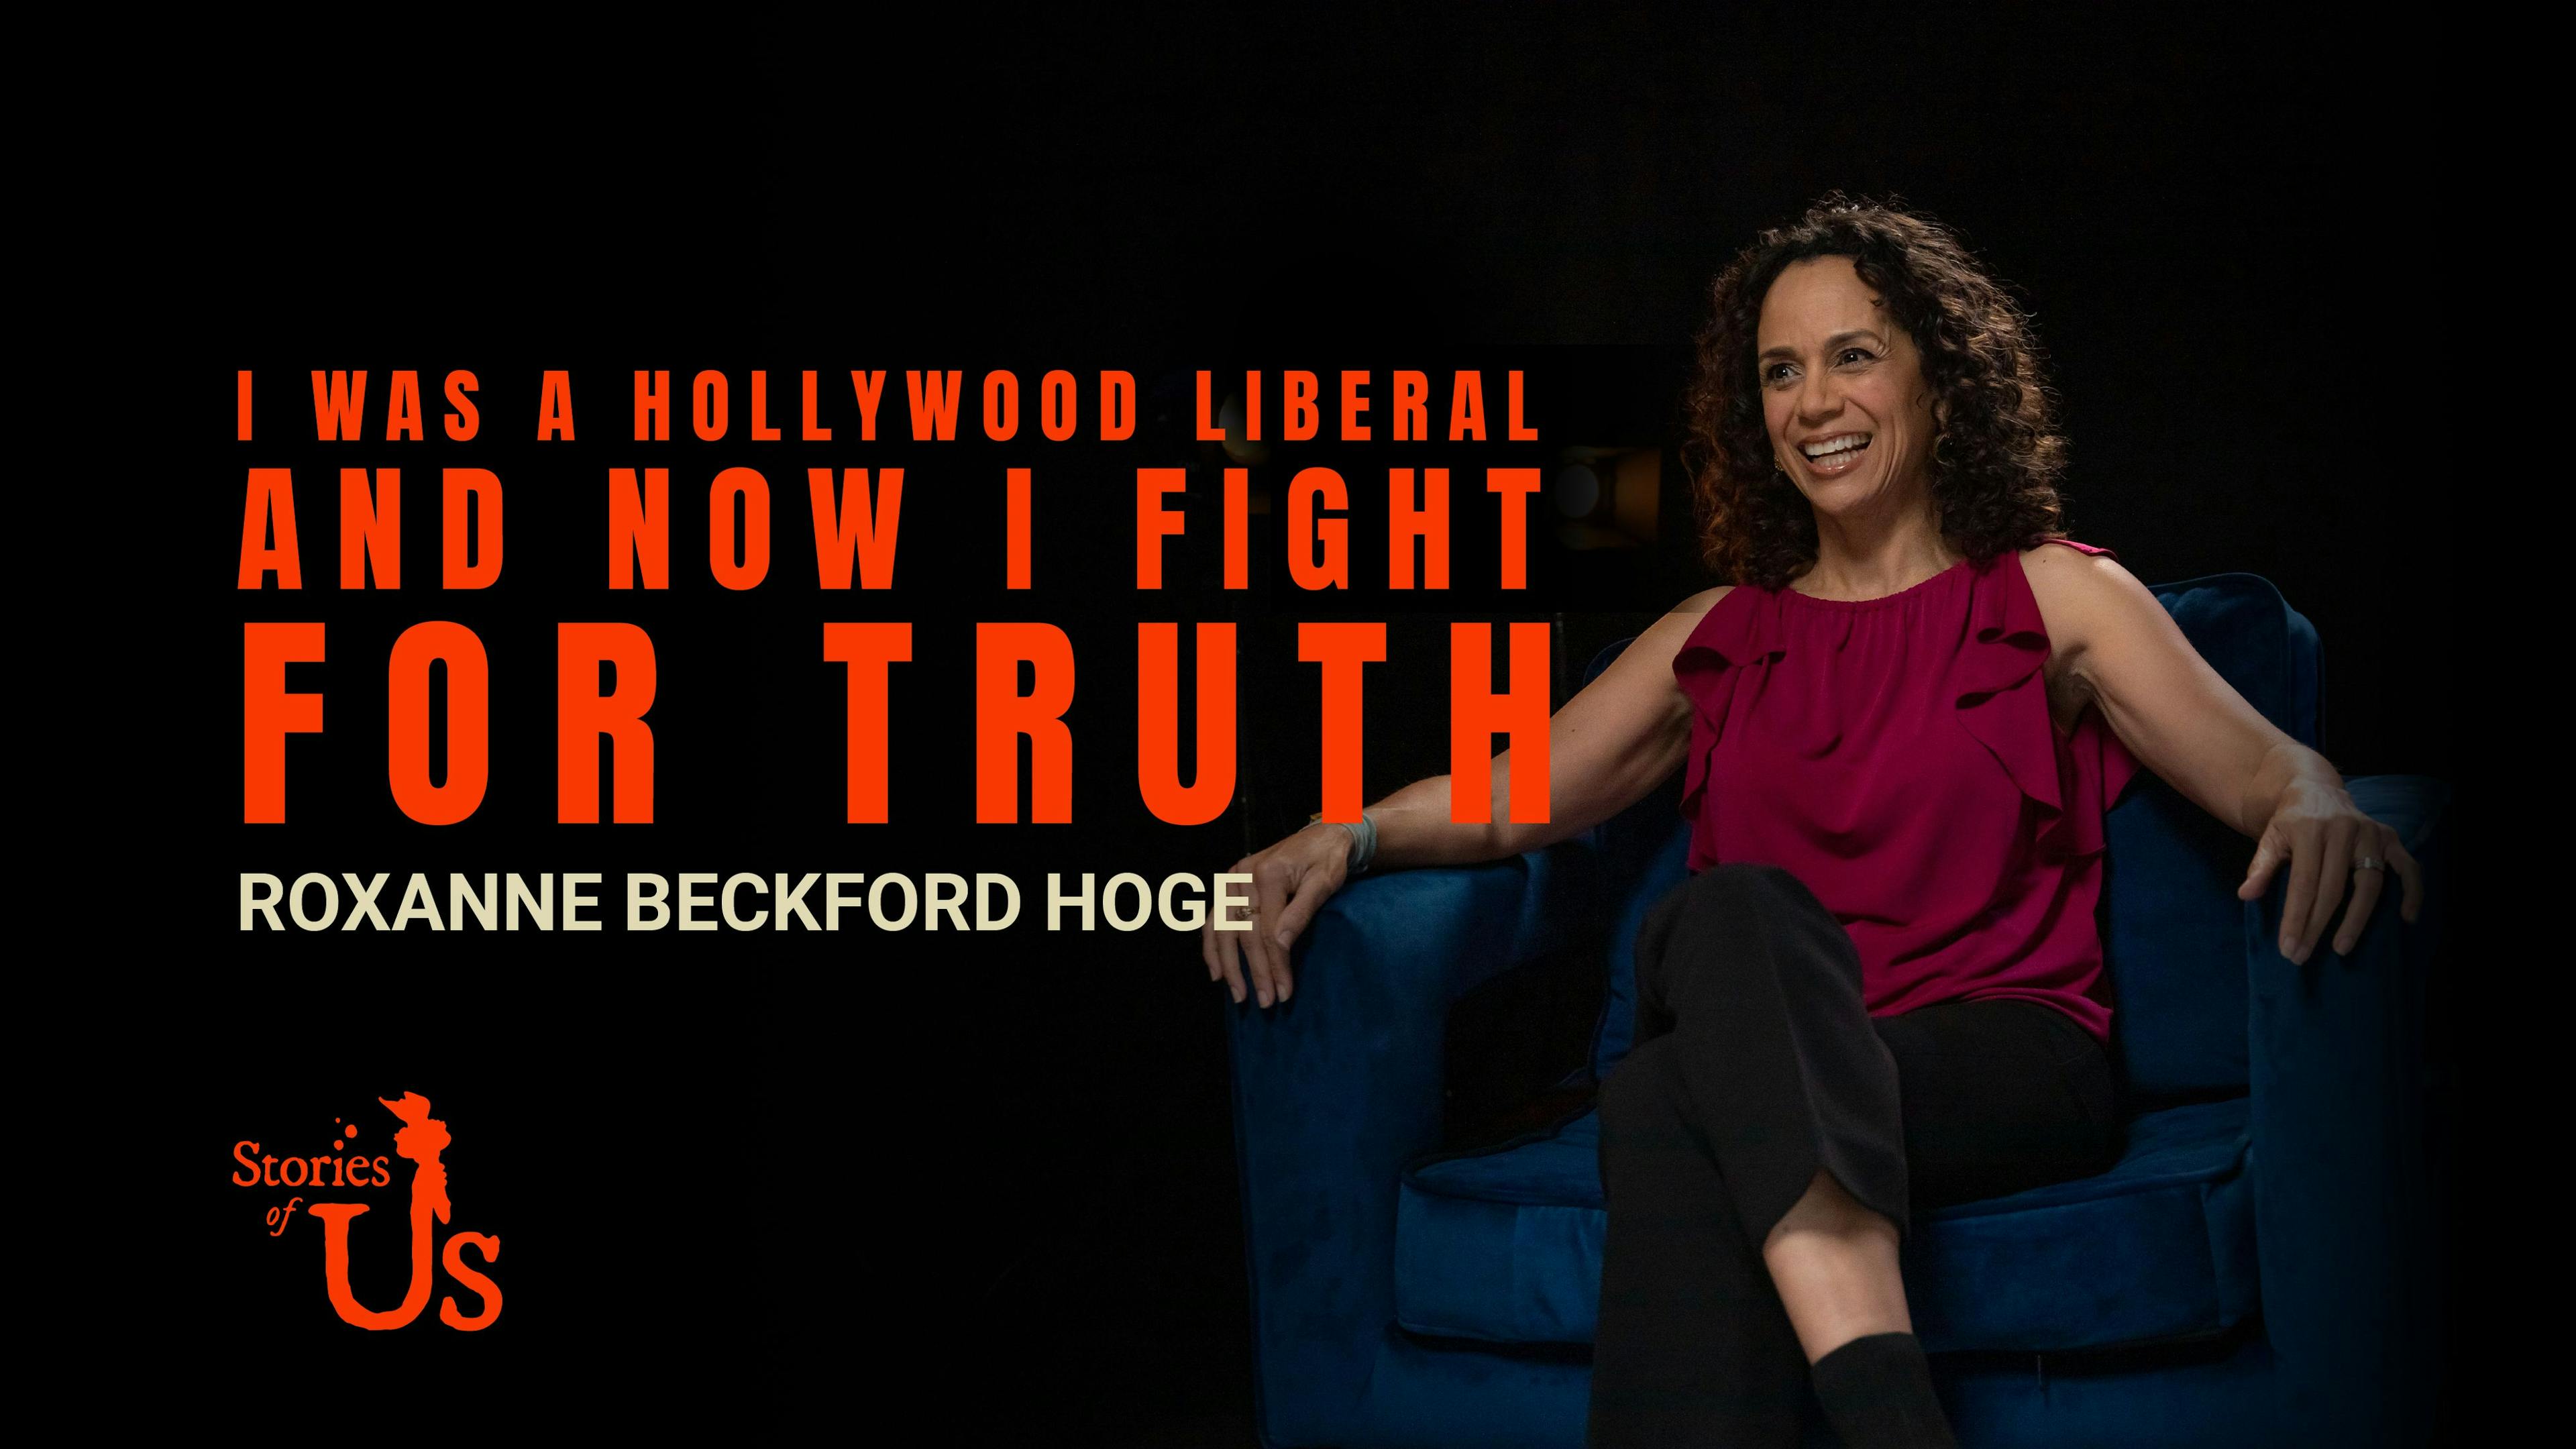 Roxanne Beckford Hoge: I Was a Hollywood Liberal and Now I Fight for Truth